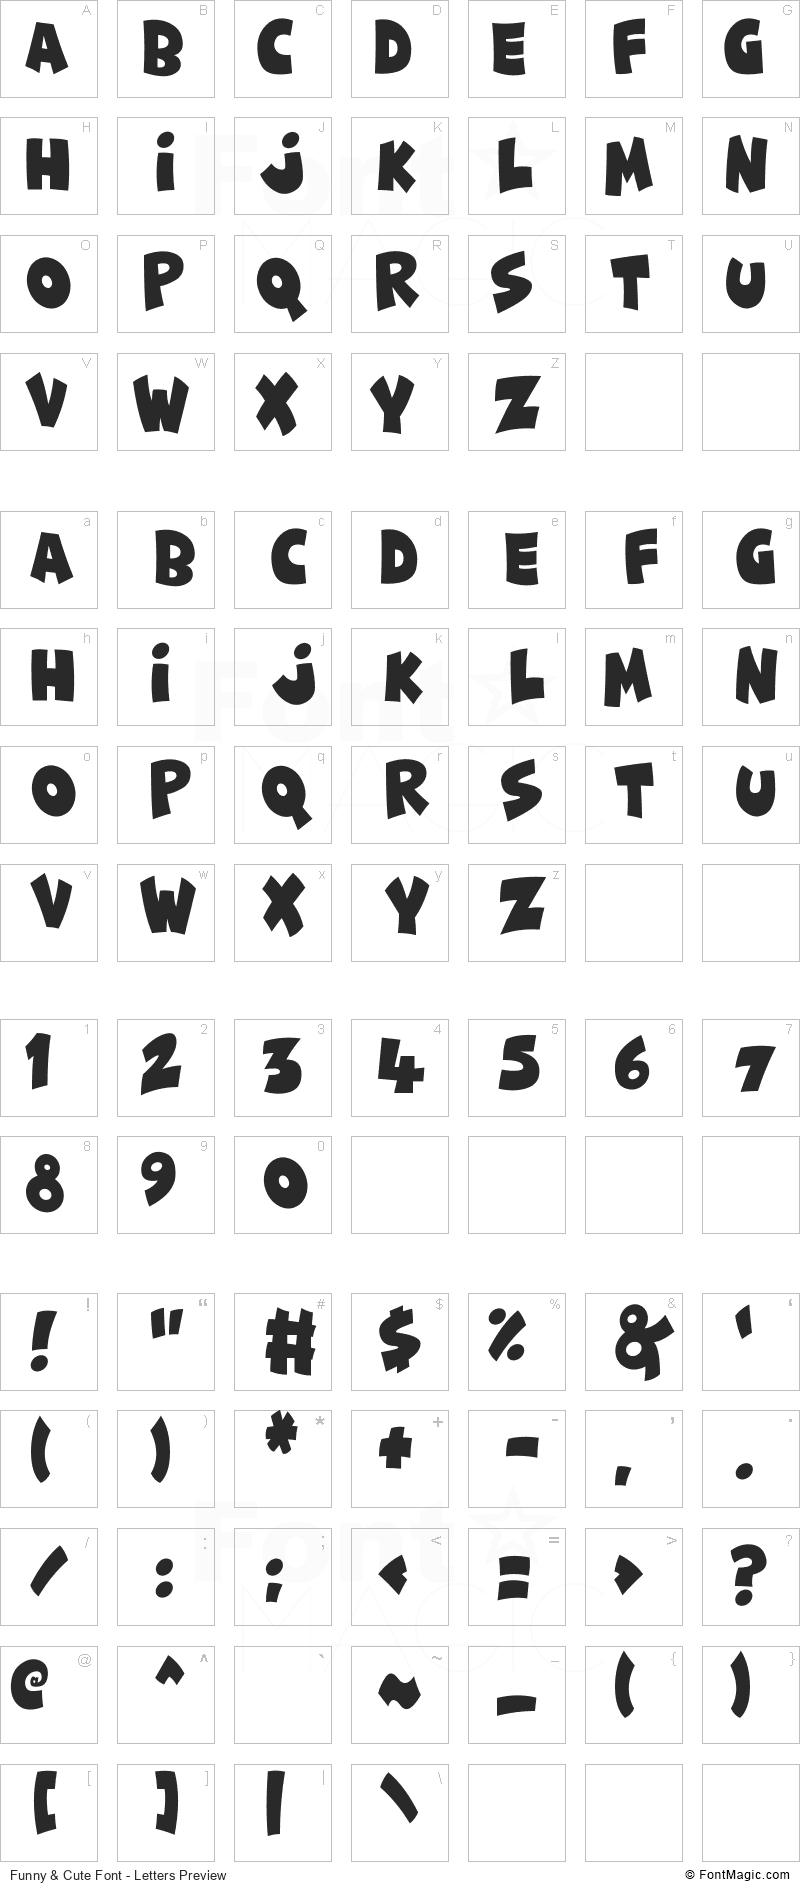 Funny & Cute Font - All Latters Preview Chart